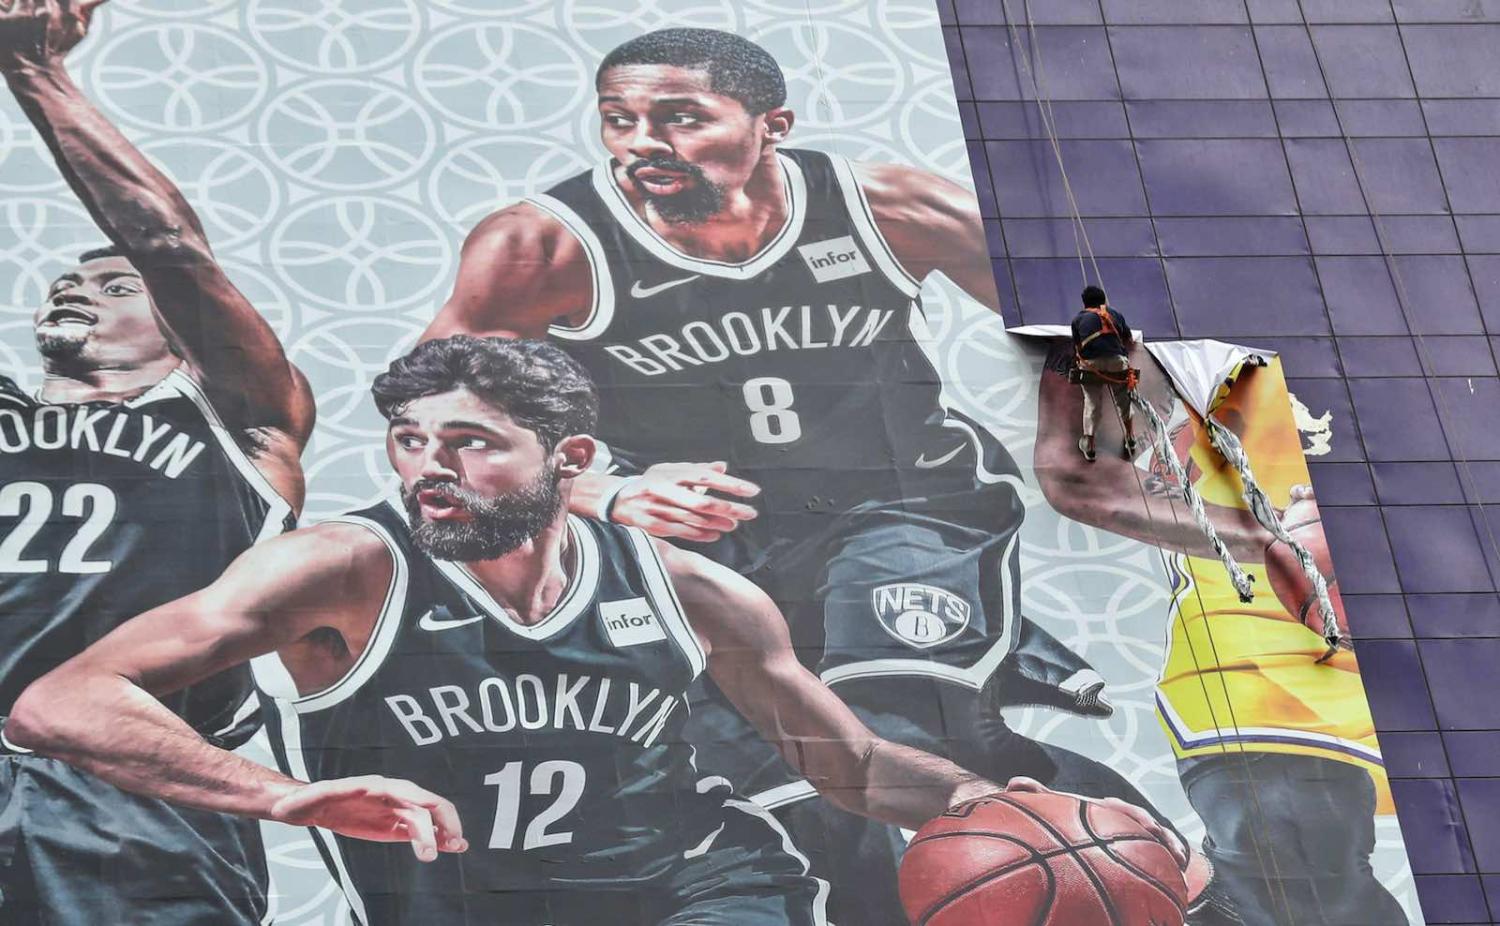 A worker removes a poster promoting an exhibition game between the Brooklyn Nets and the Los Angeles Lakers, Shanghai, 9 October 2019 (Photo: Zhang Hengwei via Getty Images)